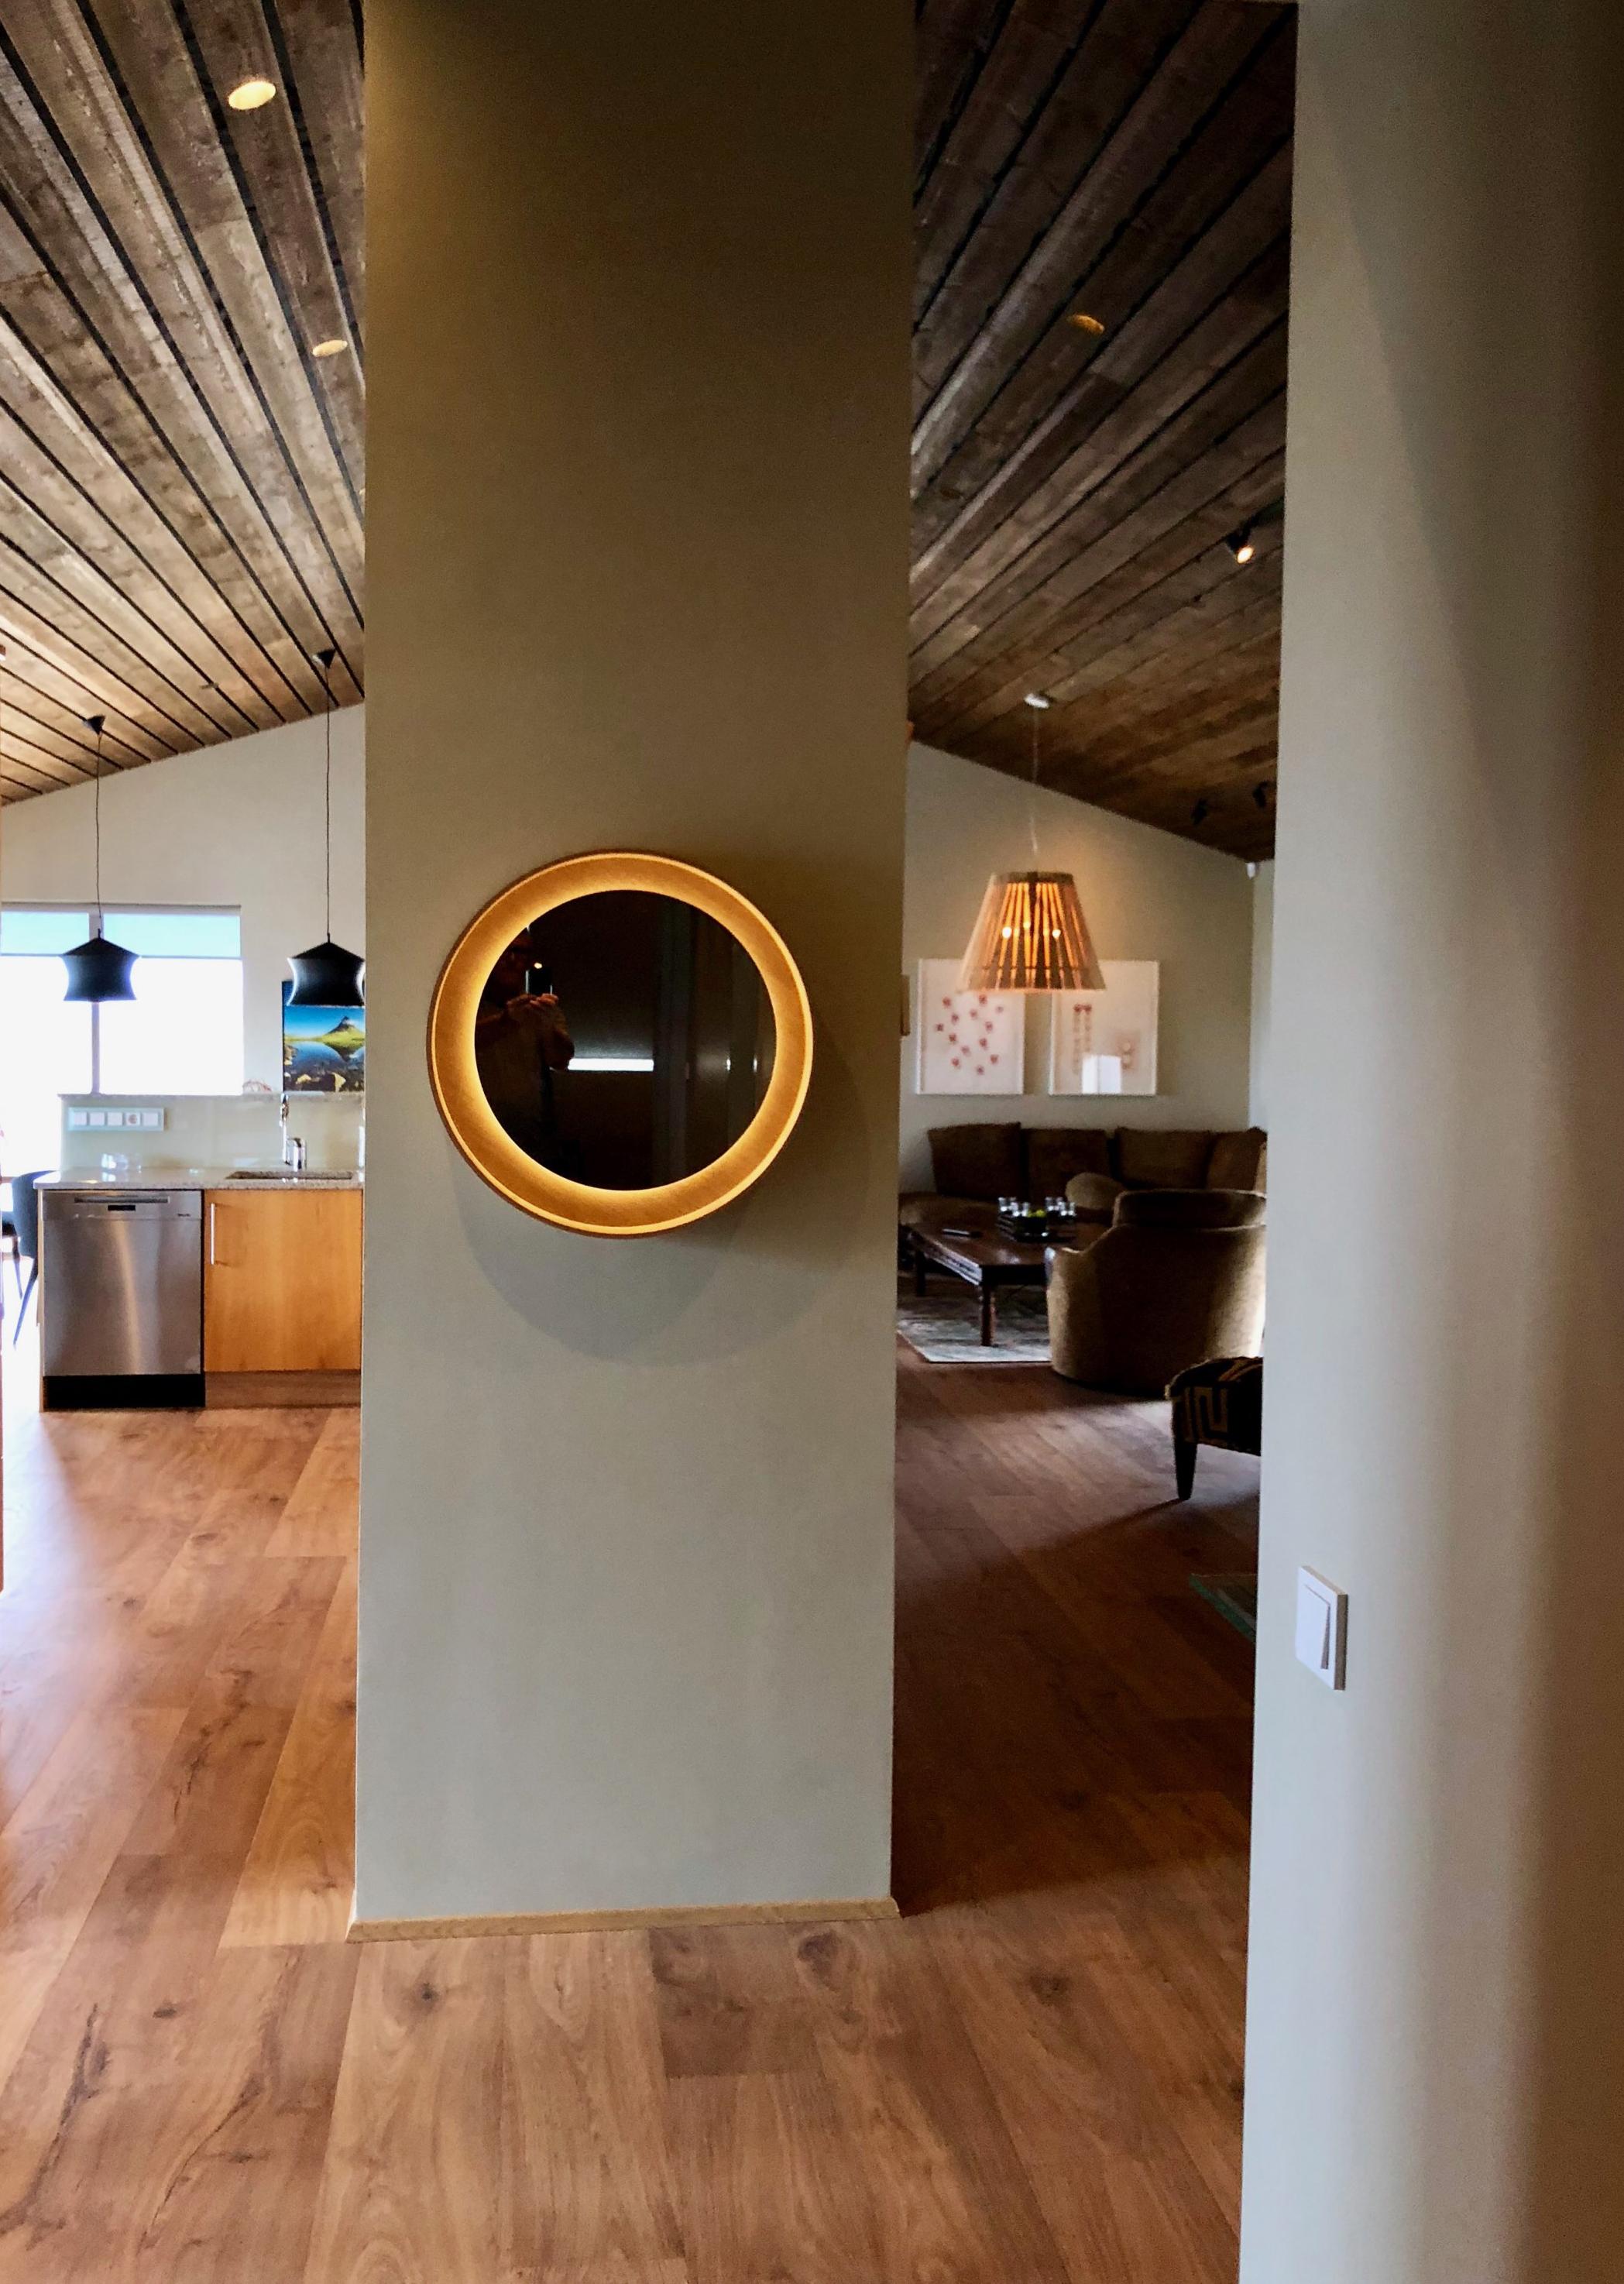 Round backlit wall mirror with LED light in walnut. Dims on rotation.
This Halo mirror collection is available in 2 sizes and 3 wood finishes (ash, oak and walnut) and in any color finishes.

Dimension:
Ø34” / Ø86cm

Materials:
Veneer in oak,